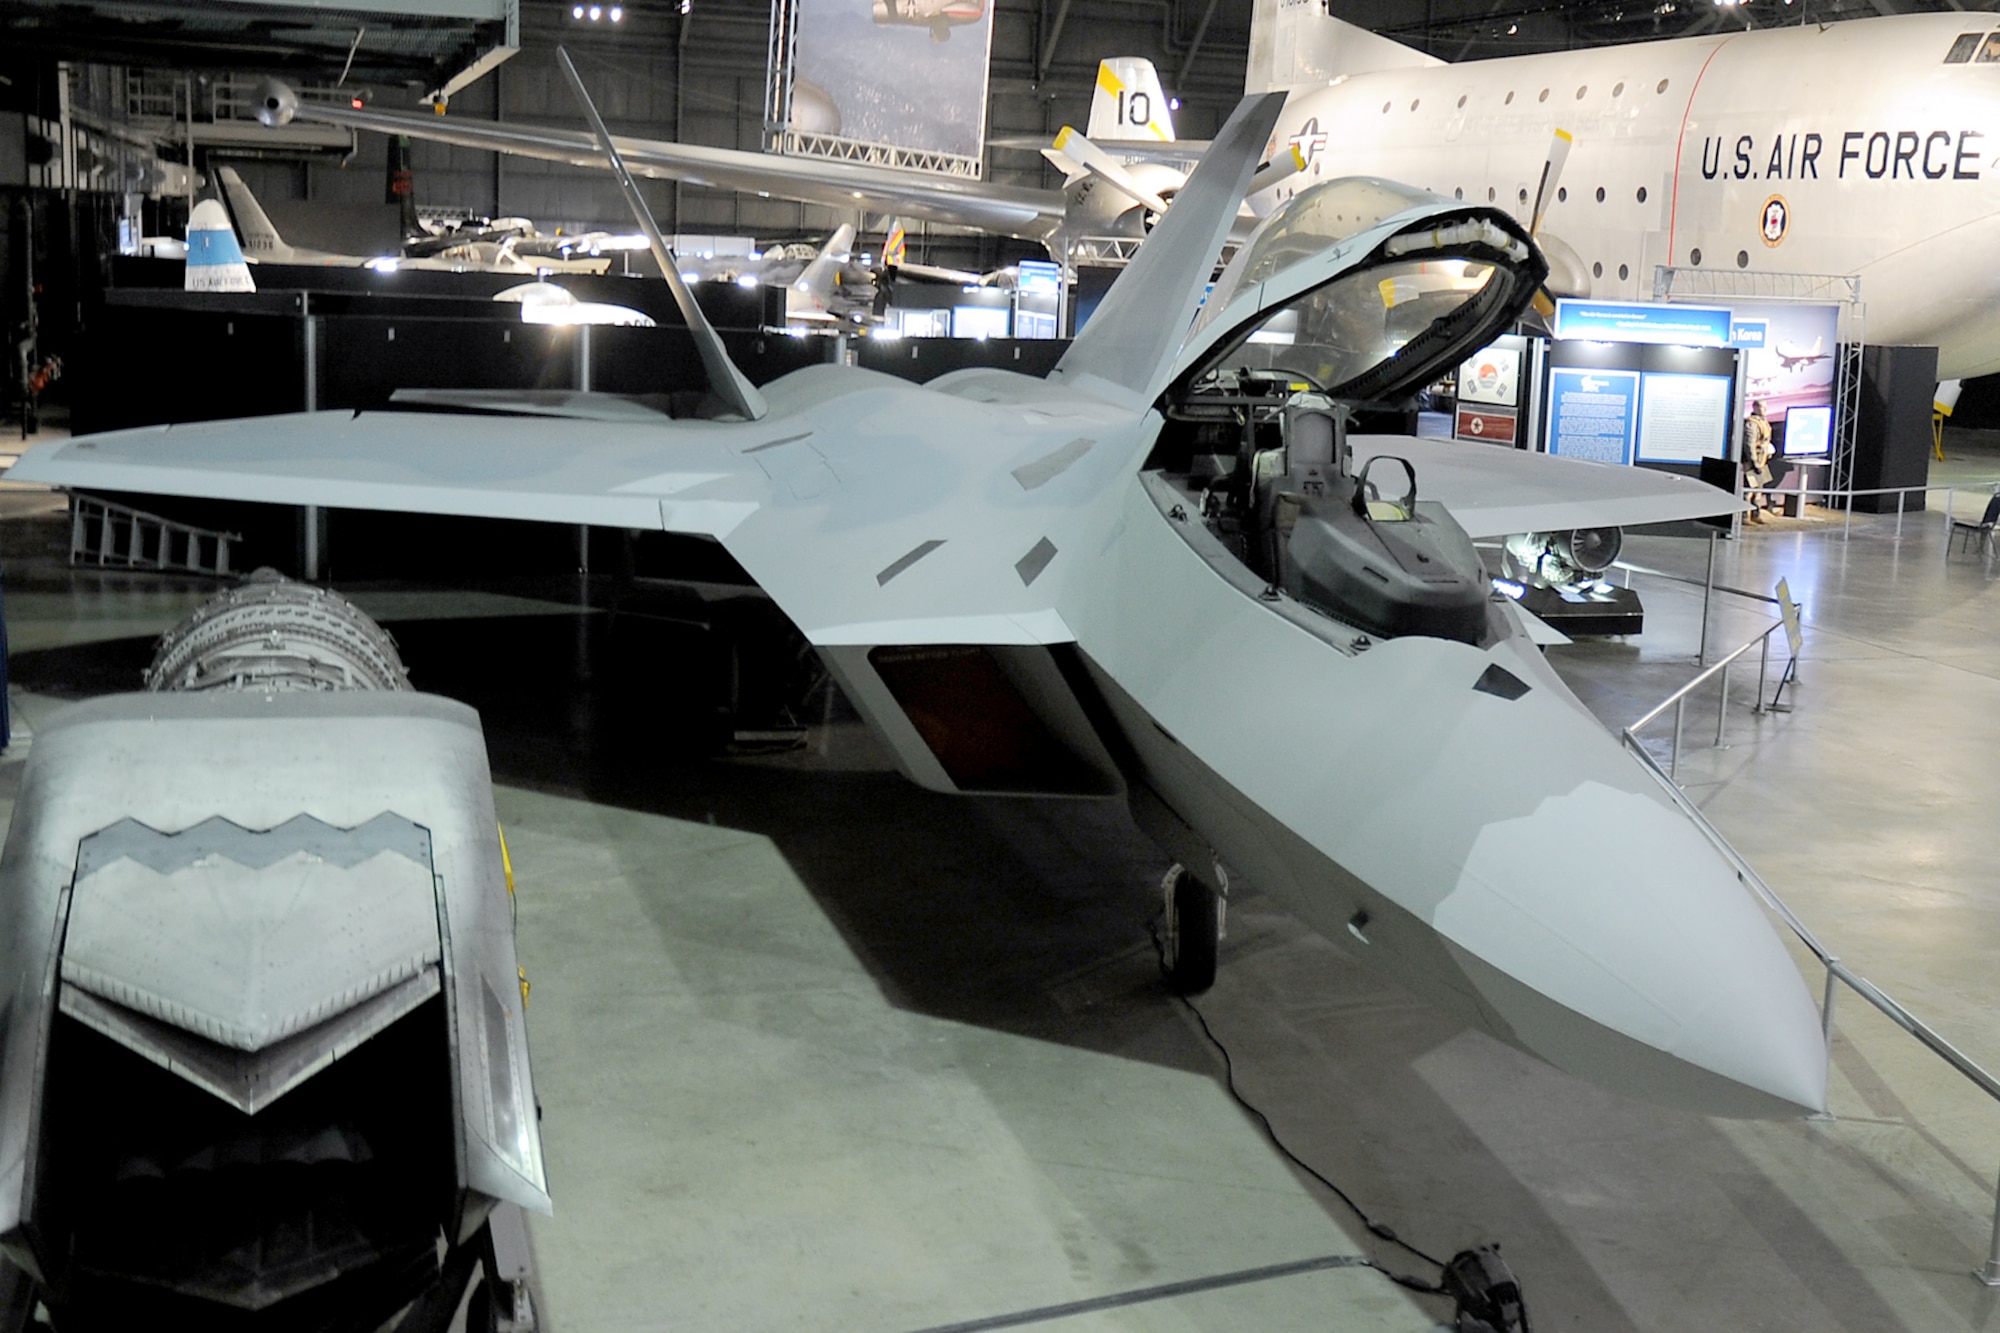 DAYTON, Ohio - Lockheed Martin F-22A Raptor at the National Museum of the U.S. Air Force. (U.S. Air Force photo)
